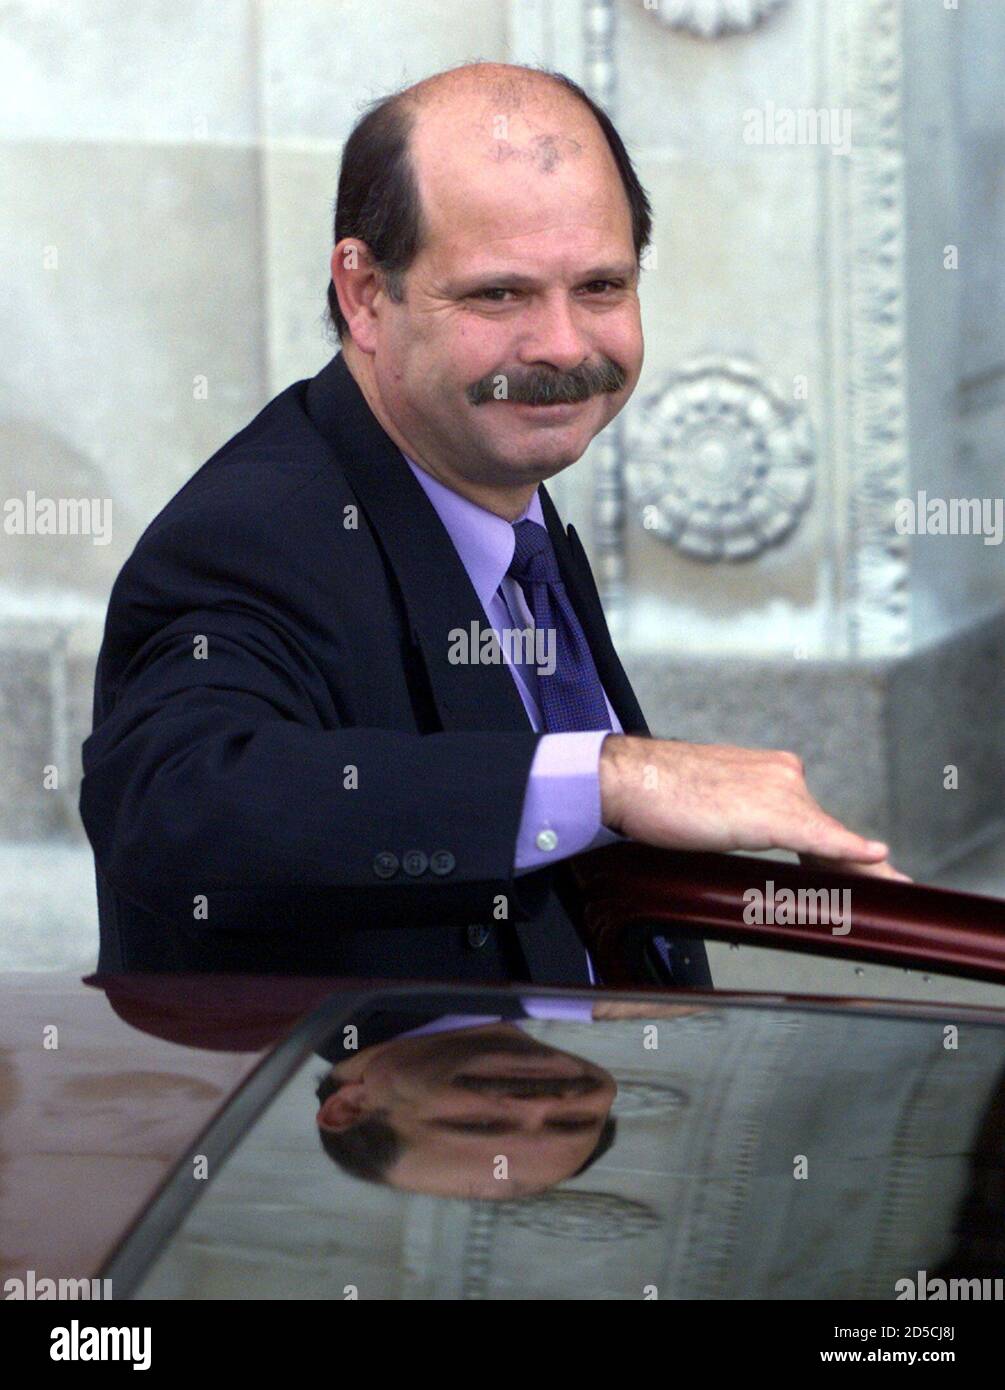 Progressive Ulster Party leader David Ervine enters Stormont Building, Belfast on November 29. Protestant and Roman Catholic parties nominated ministers to a coalition government of pro-Irish Republicans and pro-British Unionists which will become fully operational on Thursday, when London will hand over power.  FP/CLH/ Stock Photo